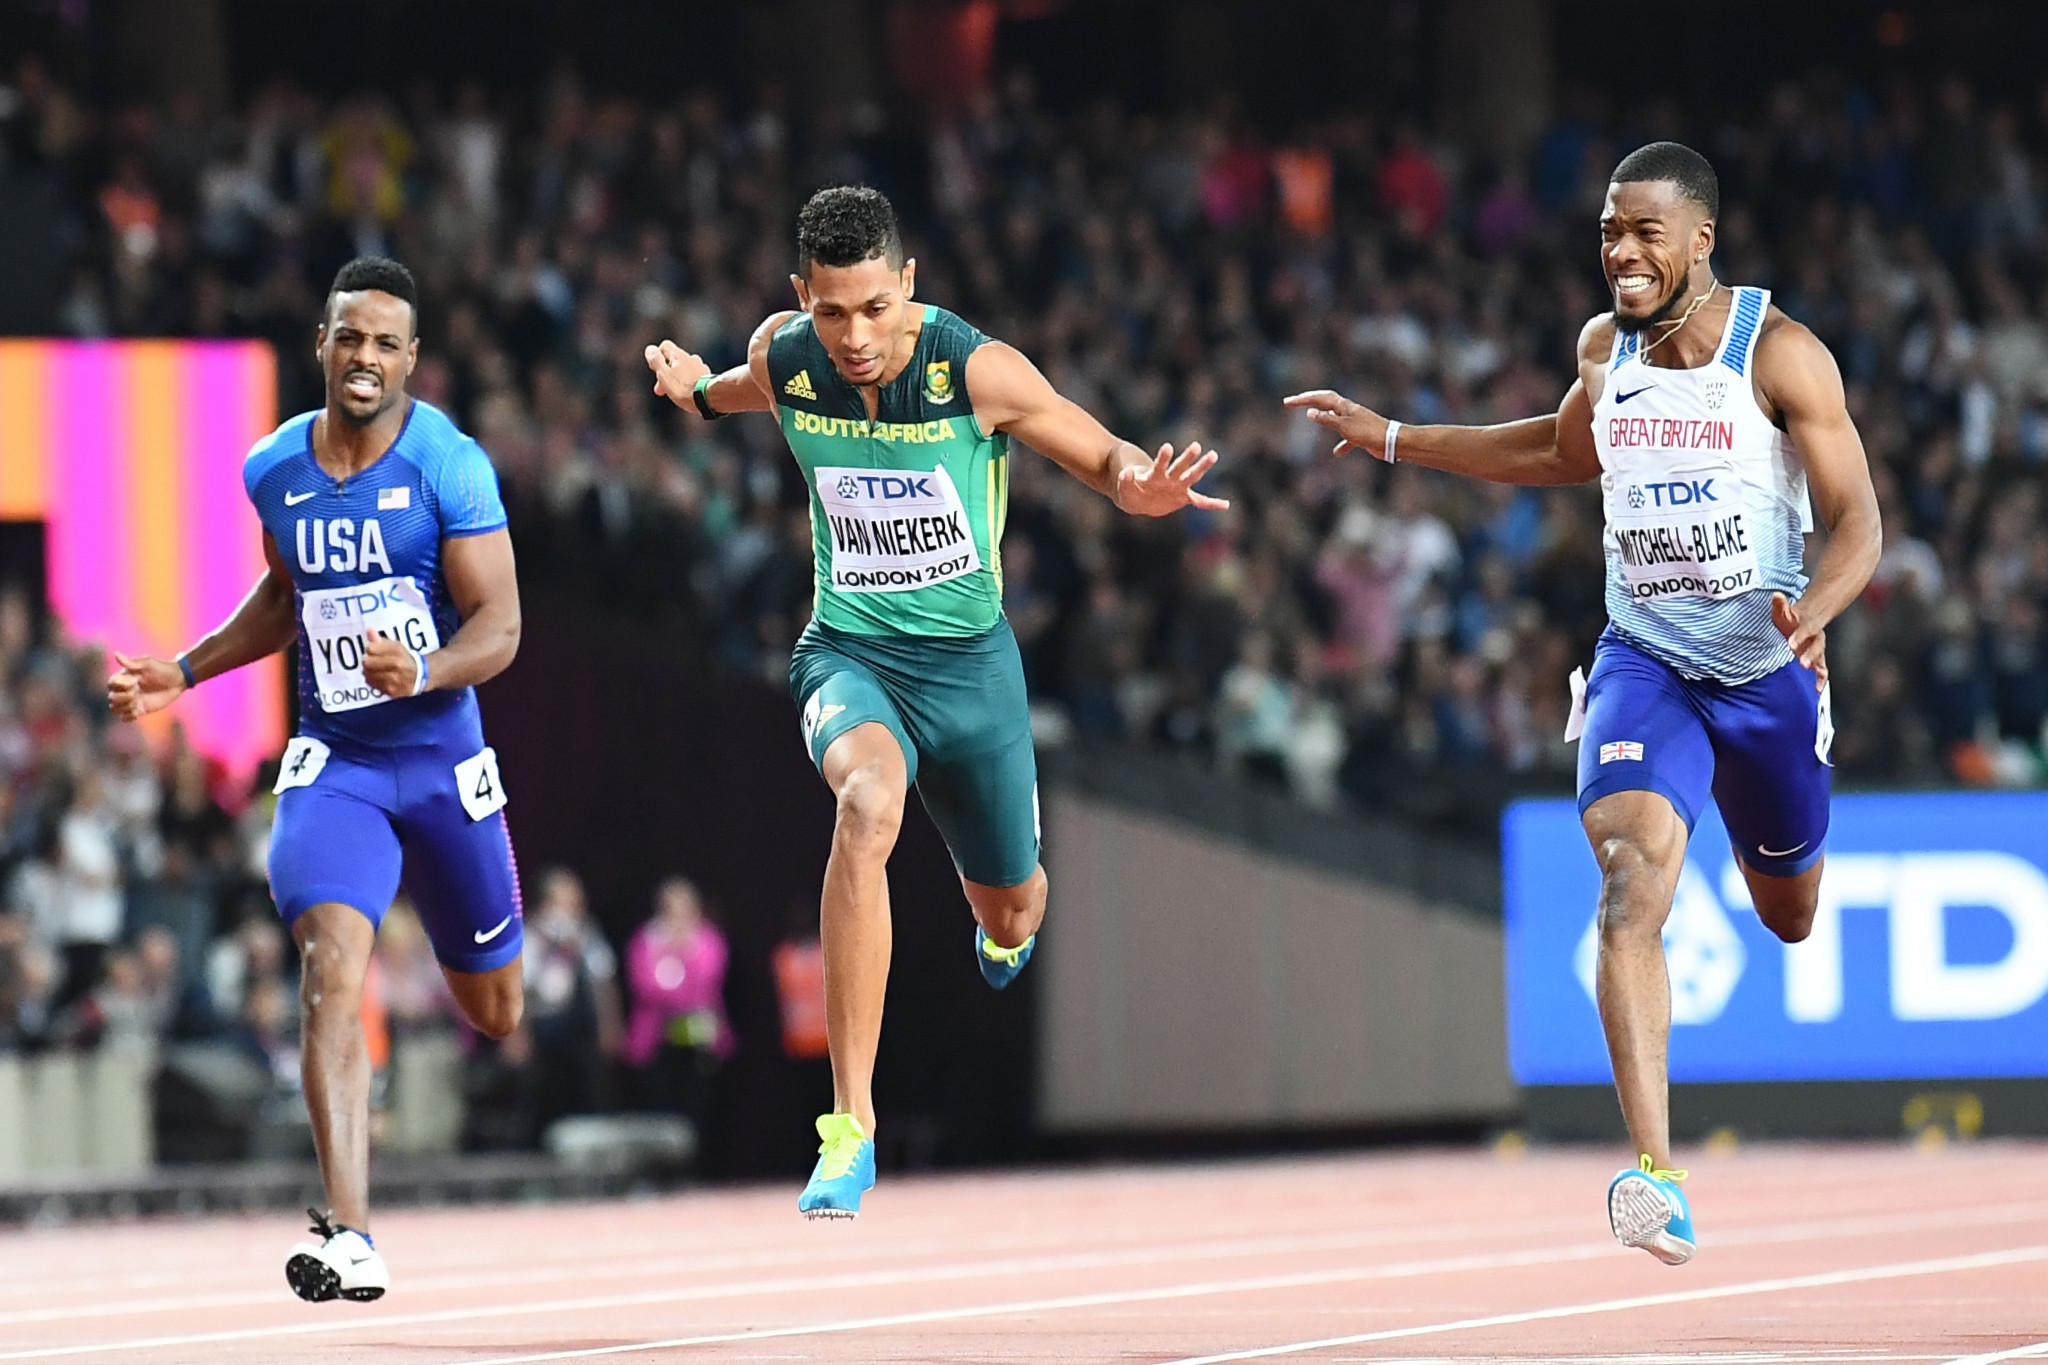 South Africa's Wayde van Niekerk had hoped to compete in the 100 and 200m in Gold Coast ©Getty Images